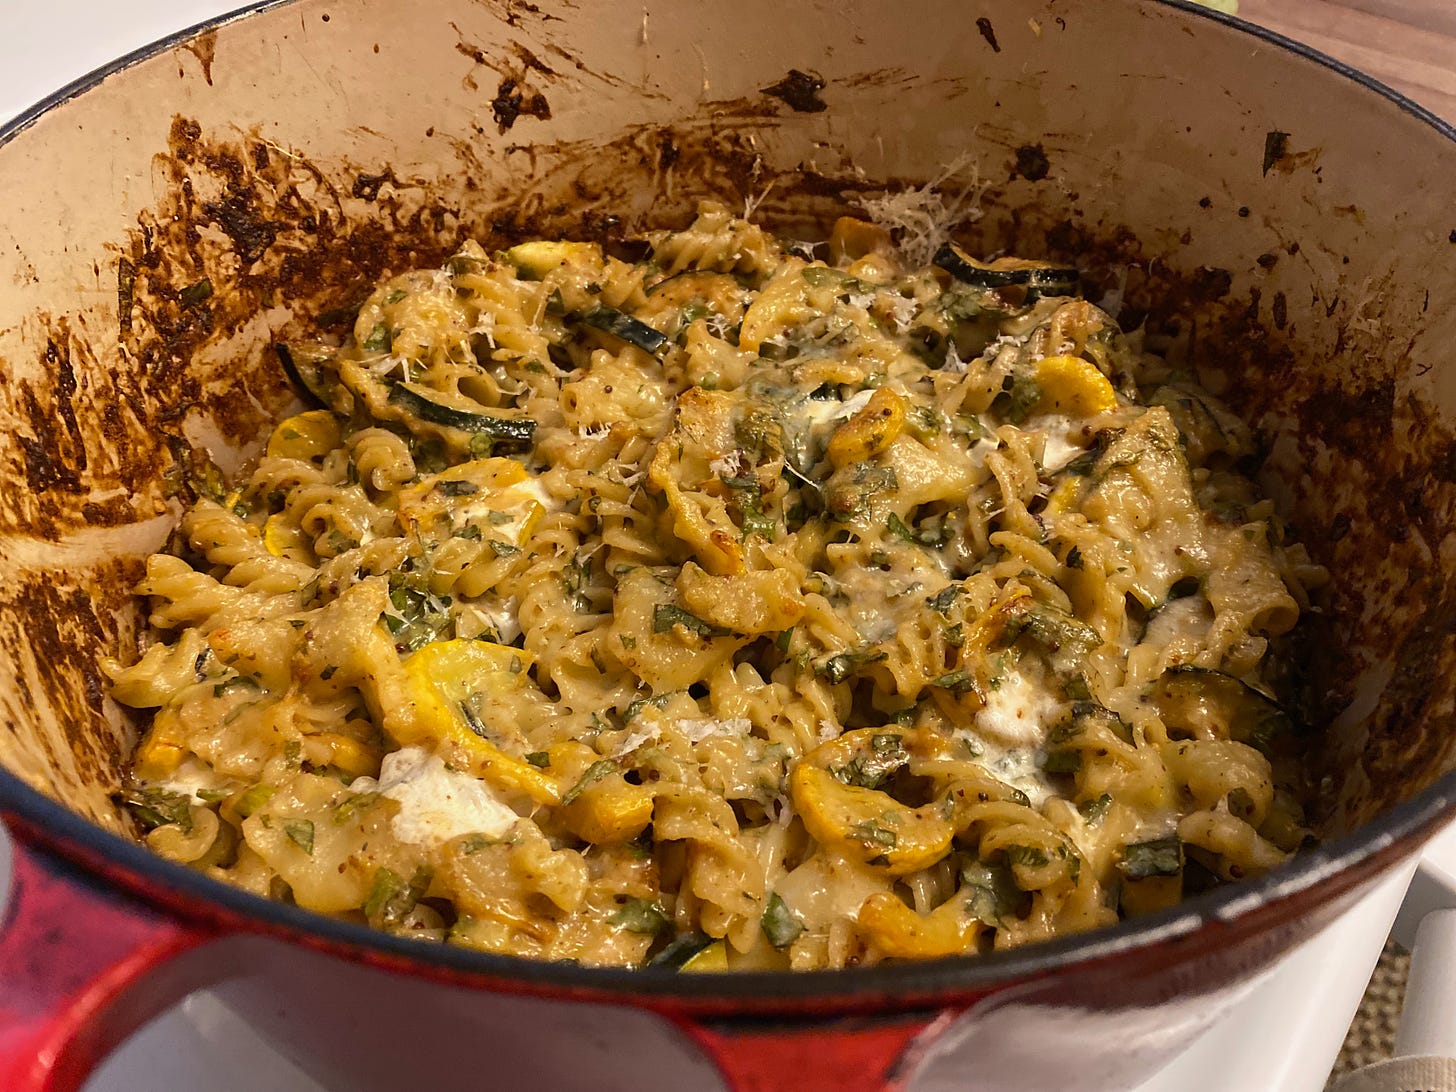 A large Dutch oven holding a cheesy pasta bake with pools of melted mozzarella, specks of fresh herbs, and crisped brown summer squash and zucchini slices.